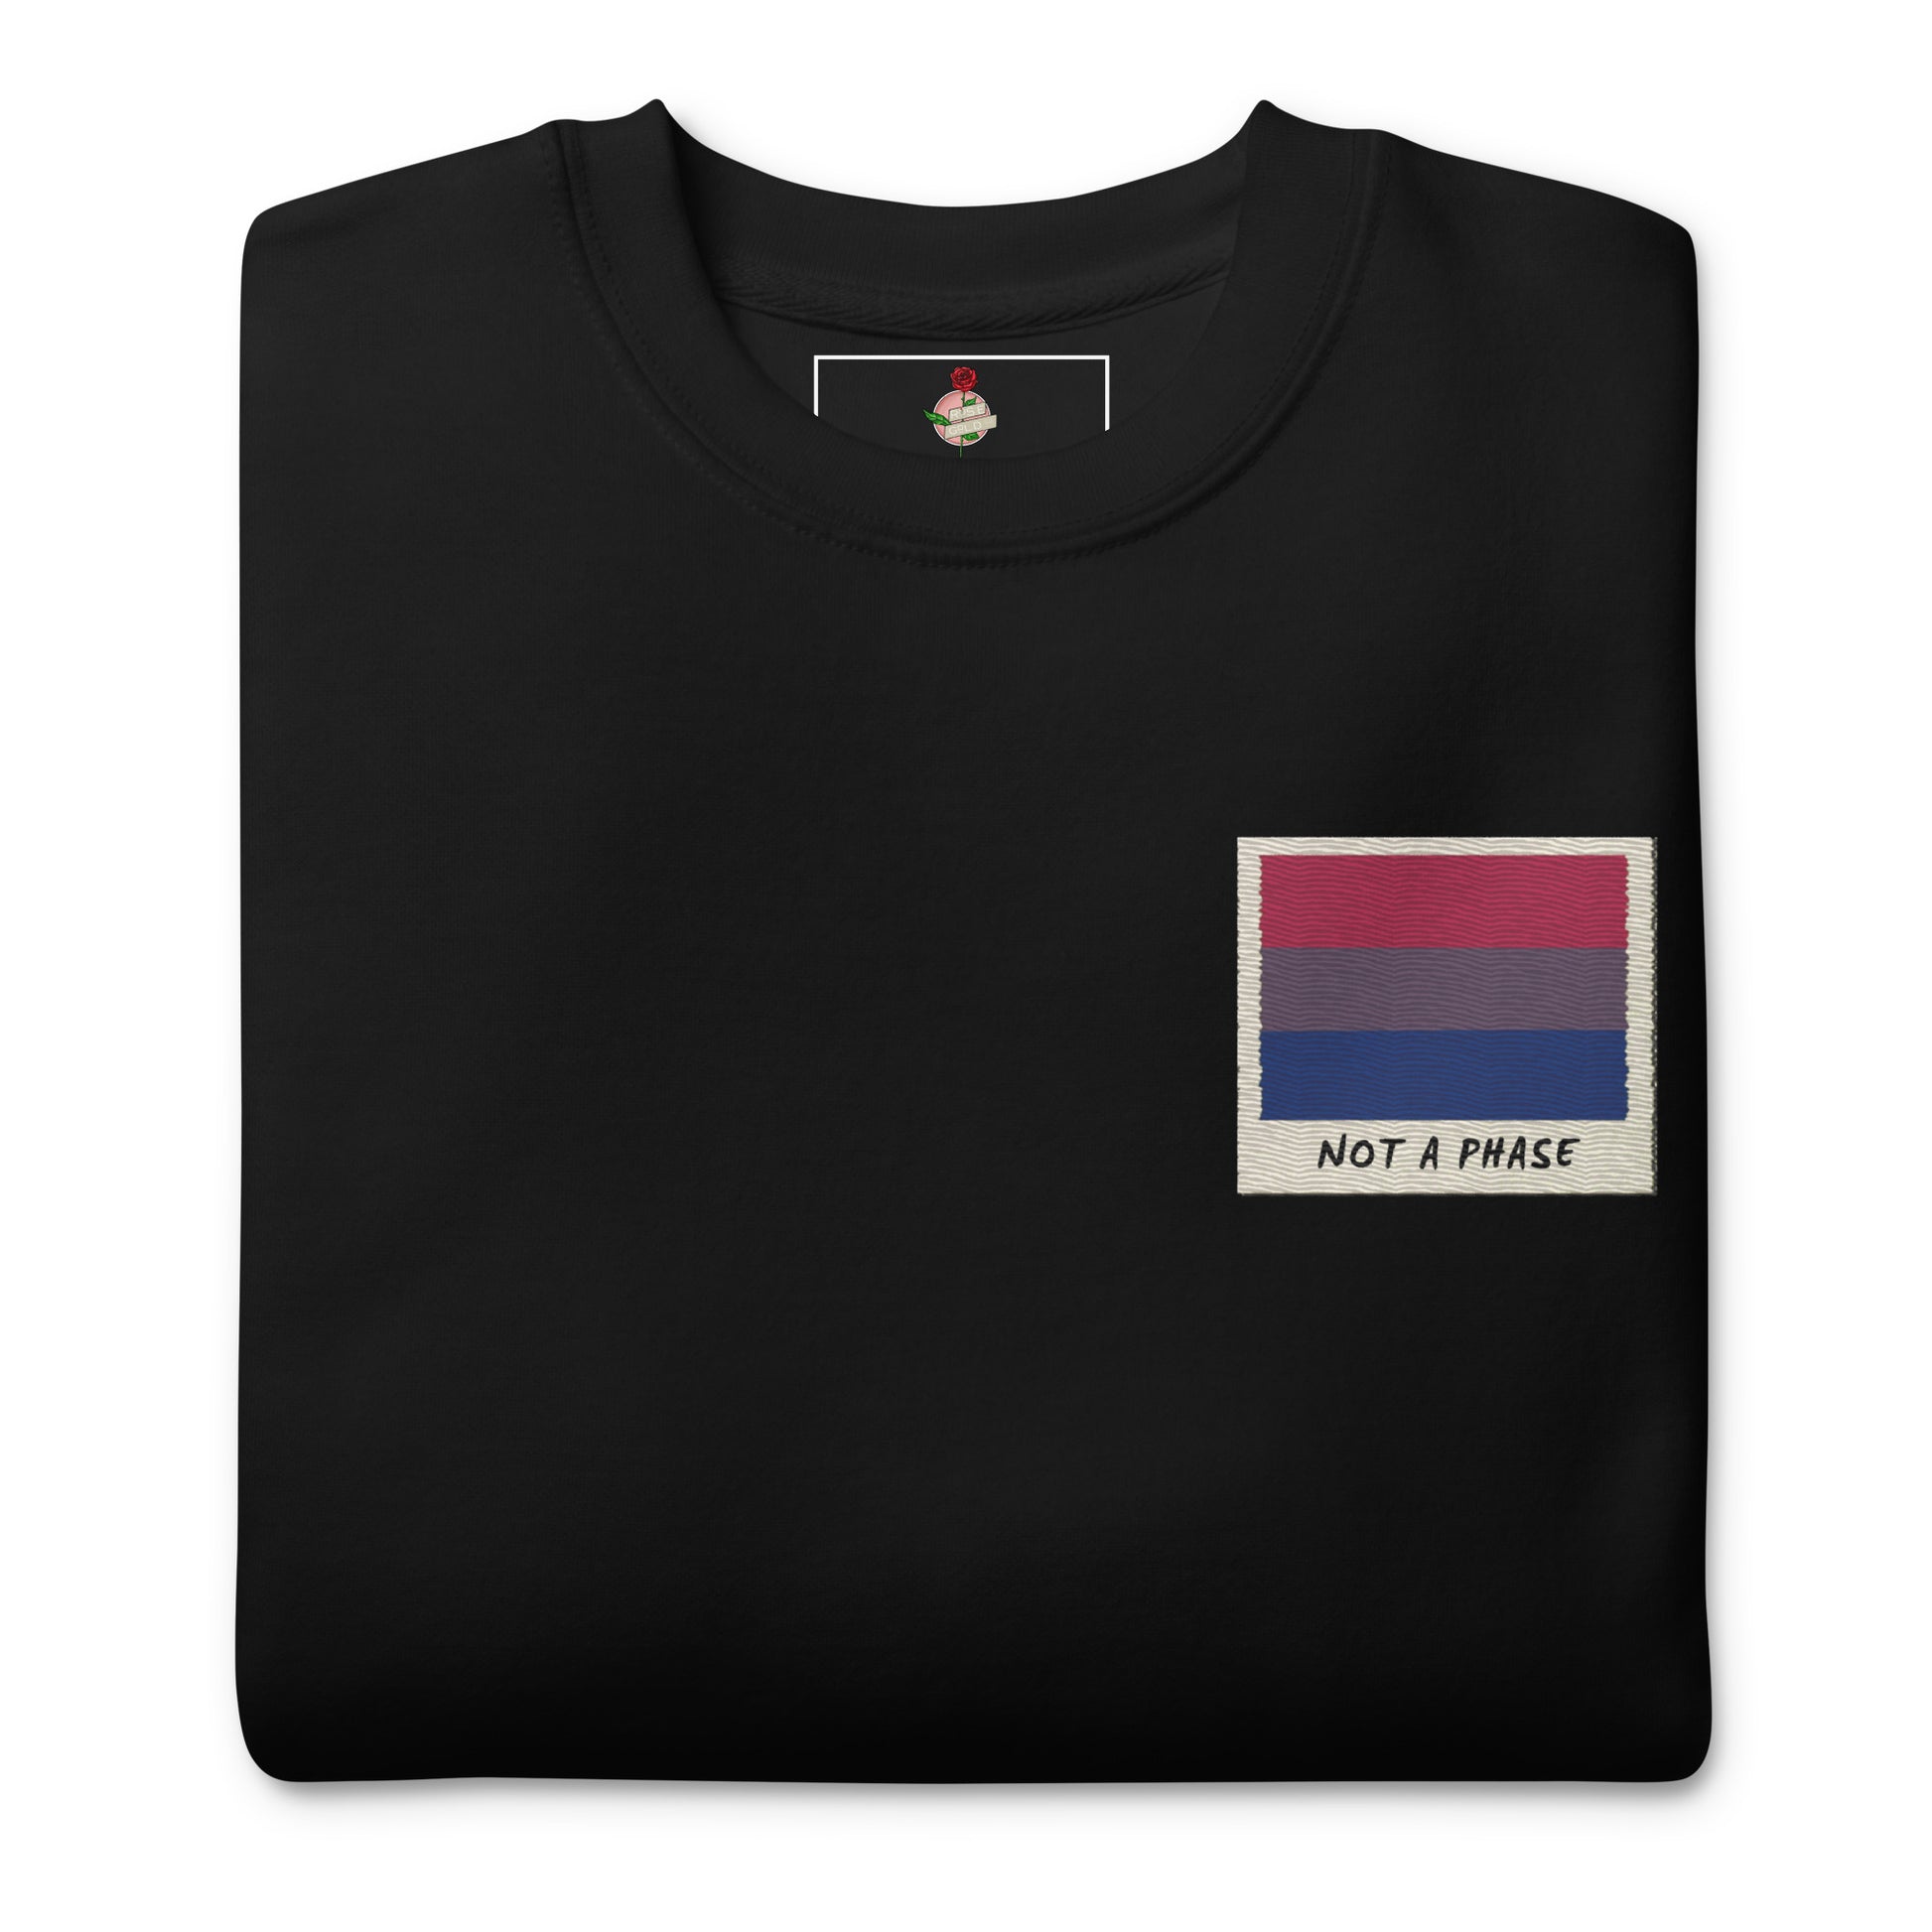 Not A Phase Bisexual Pride Polaroid Sweatshirt - Rose Gold Co. Shop